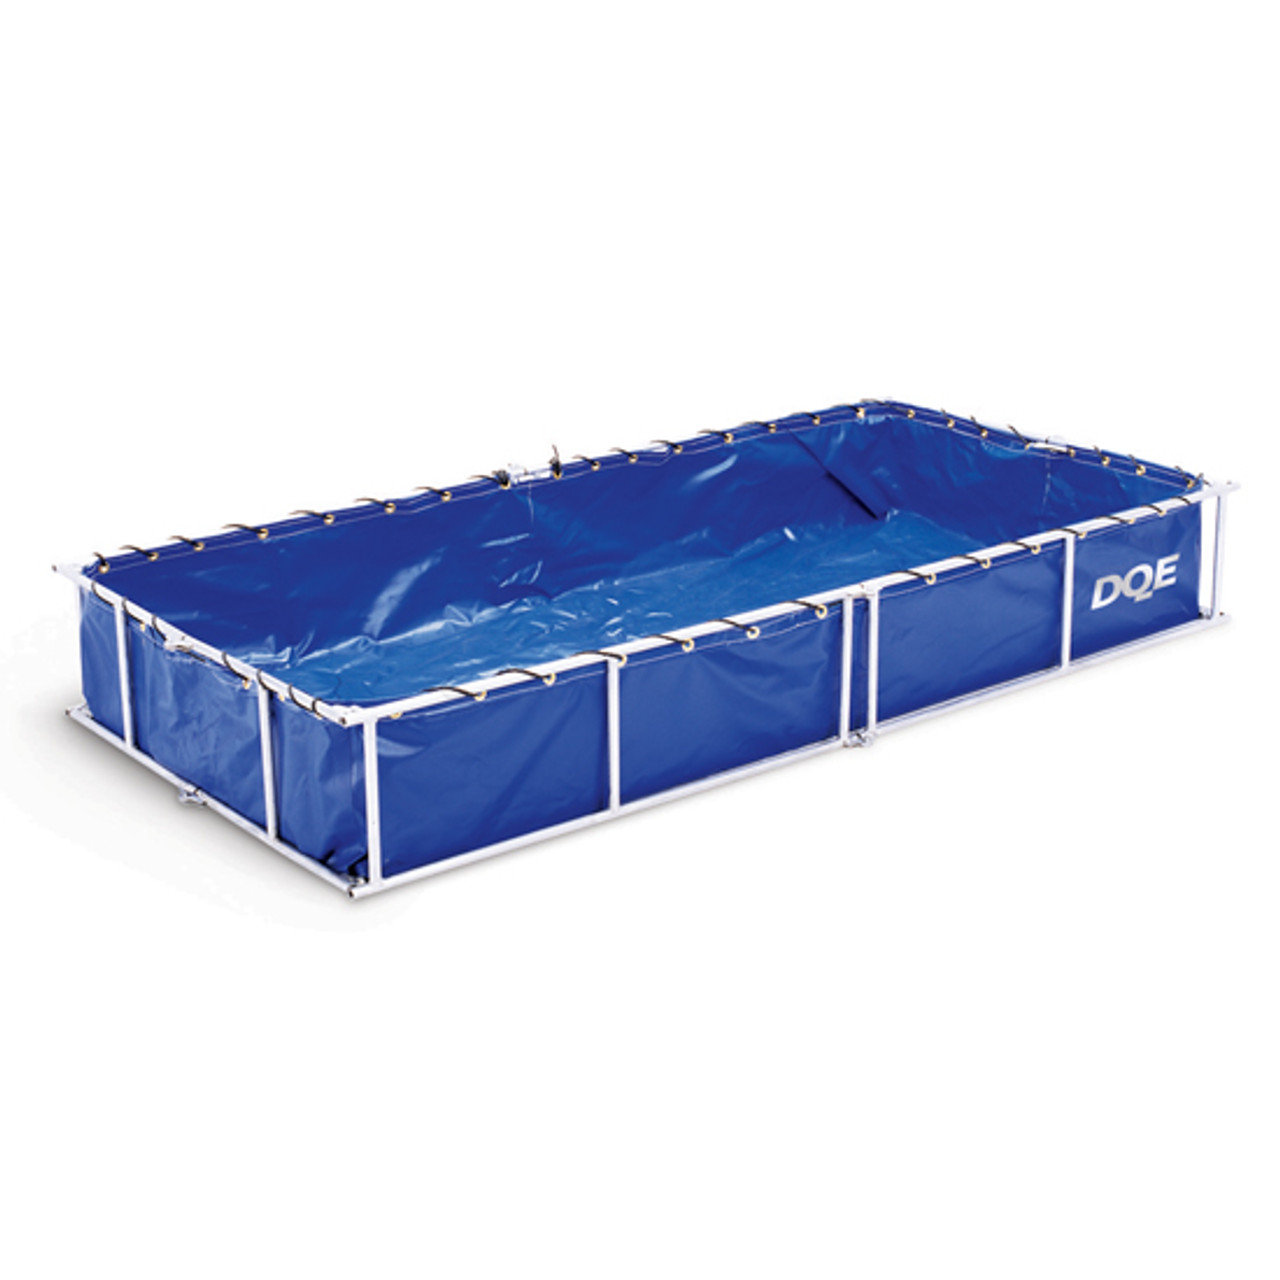 Standard Collection Pool - 4' x 8' - DQE